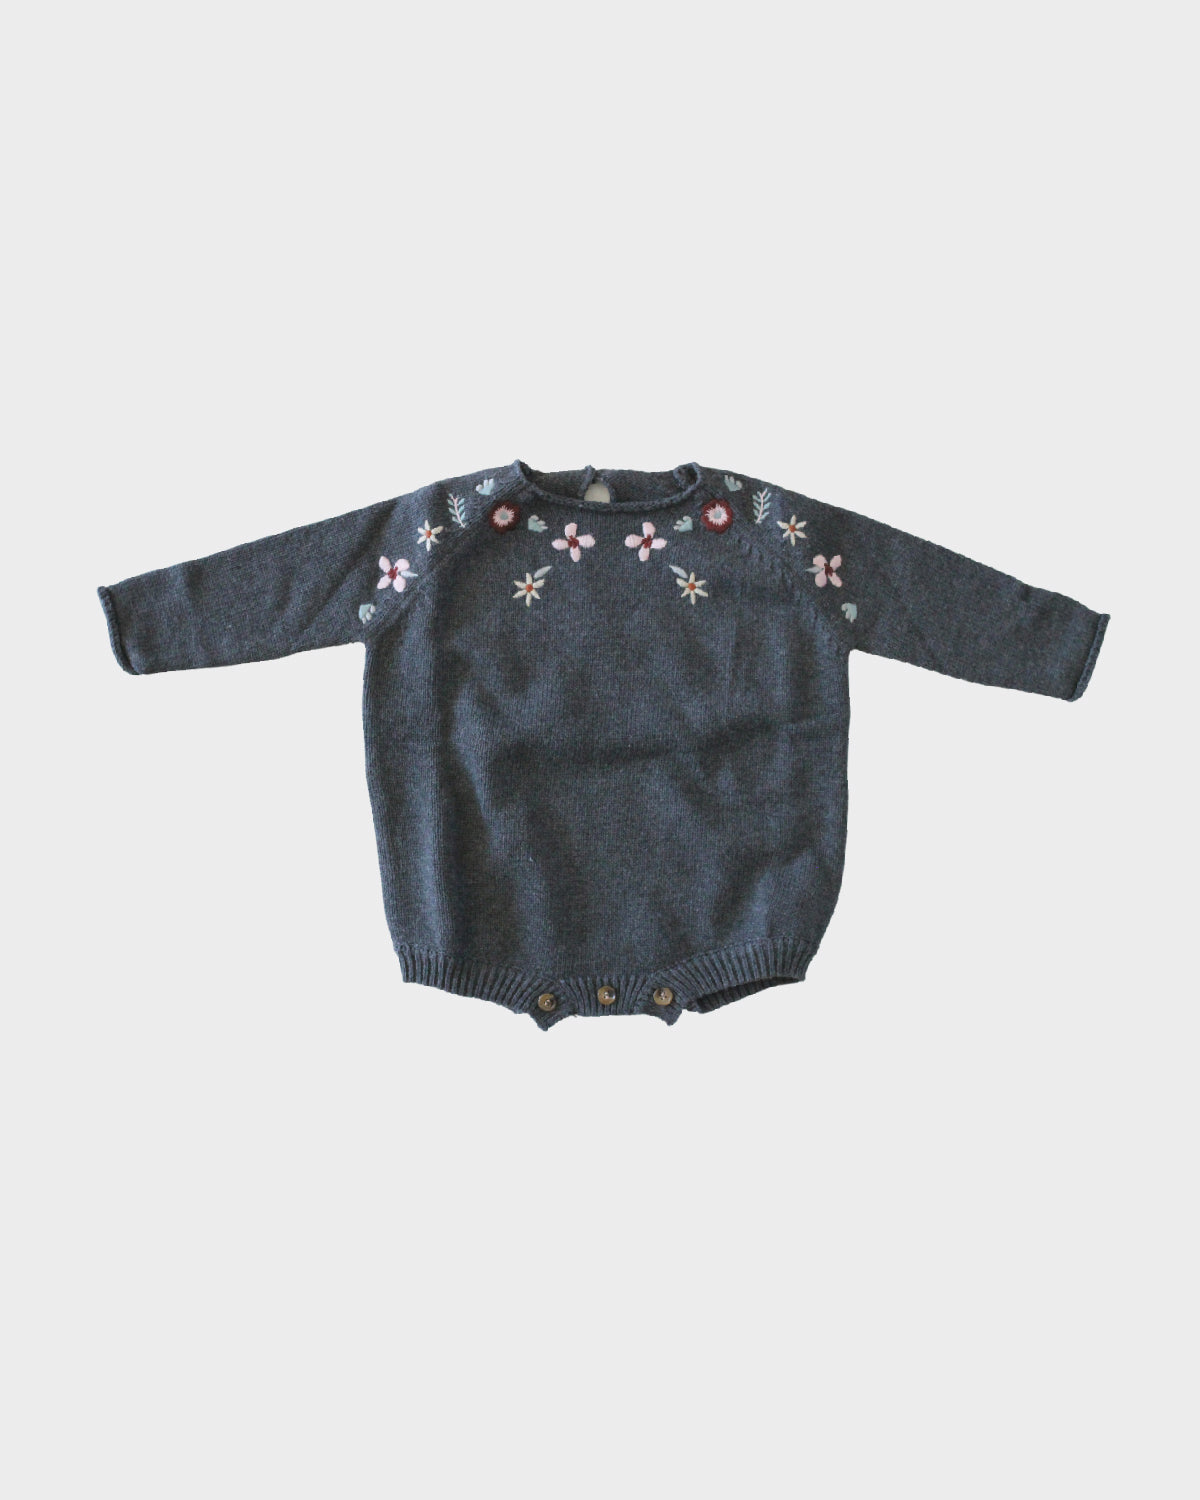 Floral Embroidery Romper SAMPLES